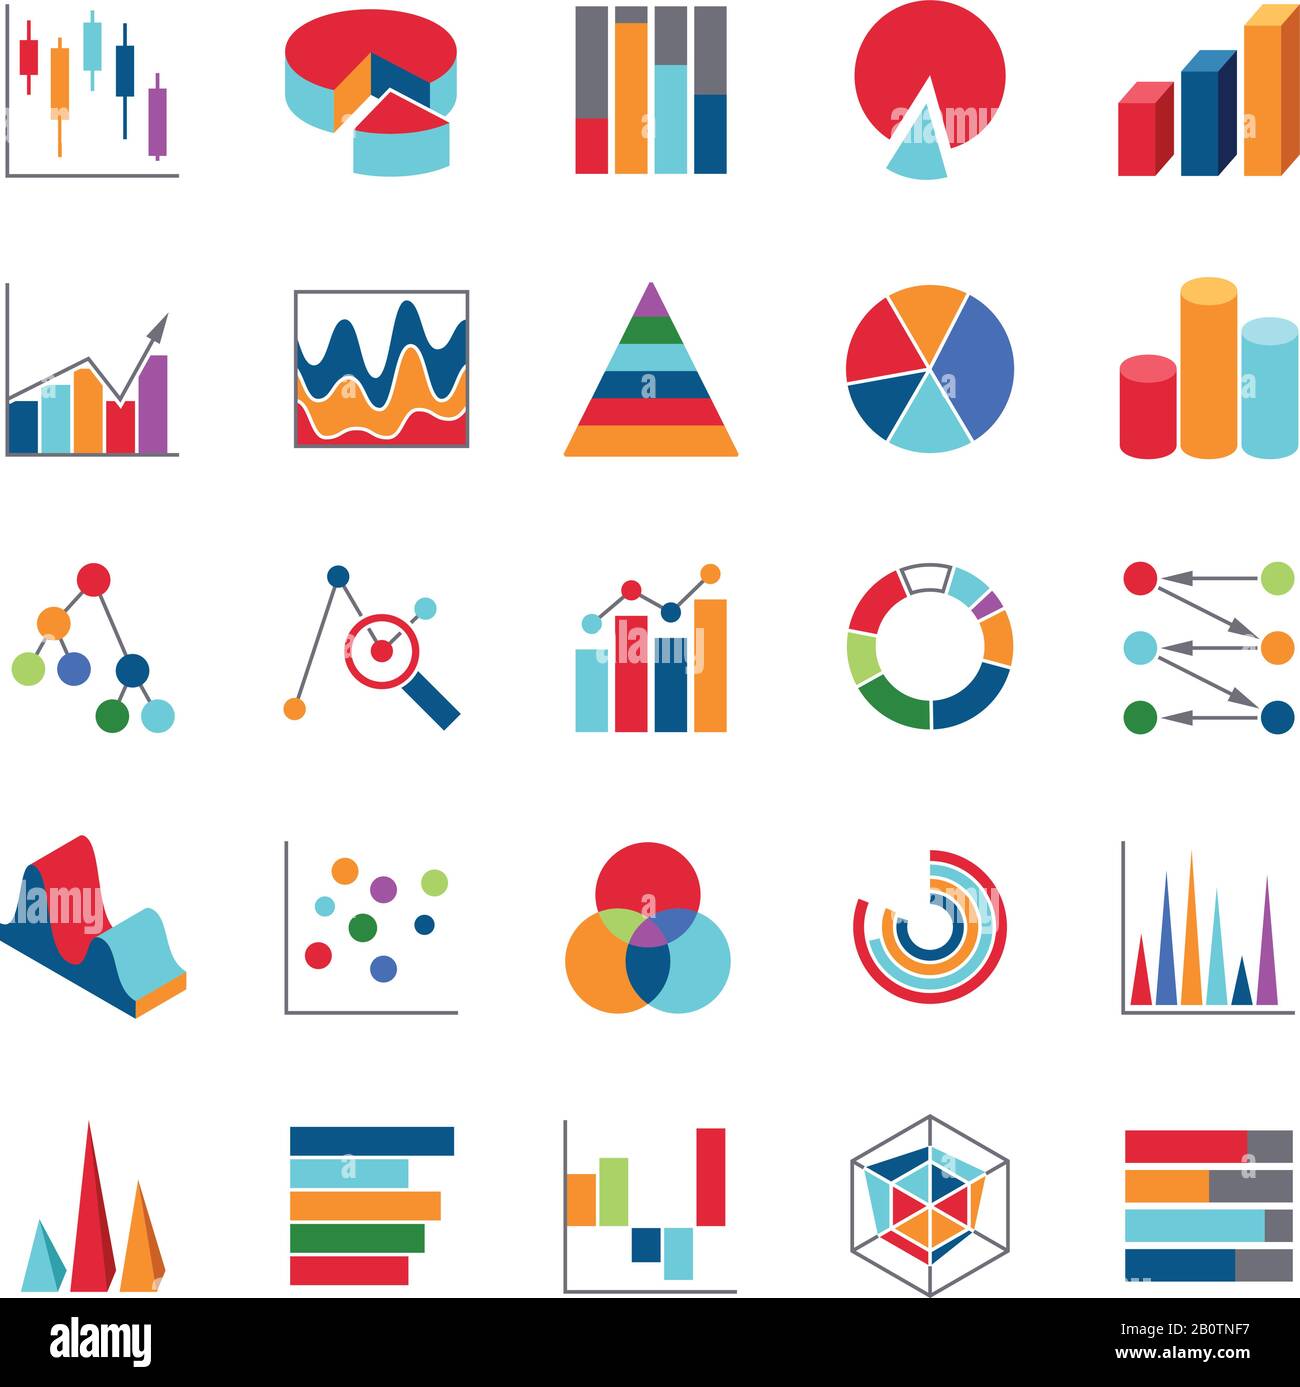 Market trends business data charts icons. Stats money graphs and bar simple vector symbols. Business diagram and chart symbol illustration Stock Vector